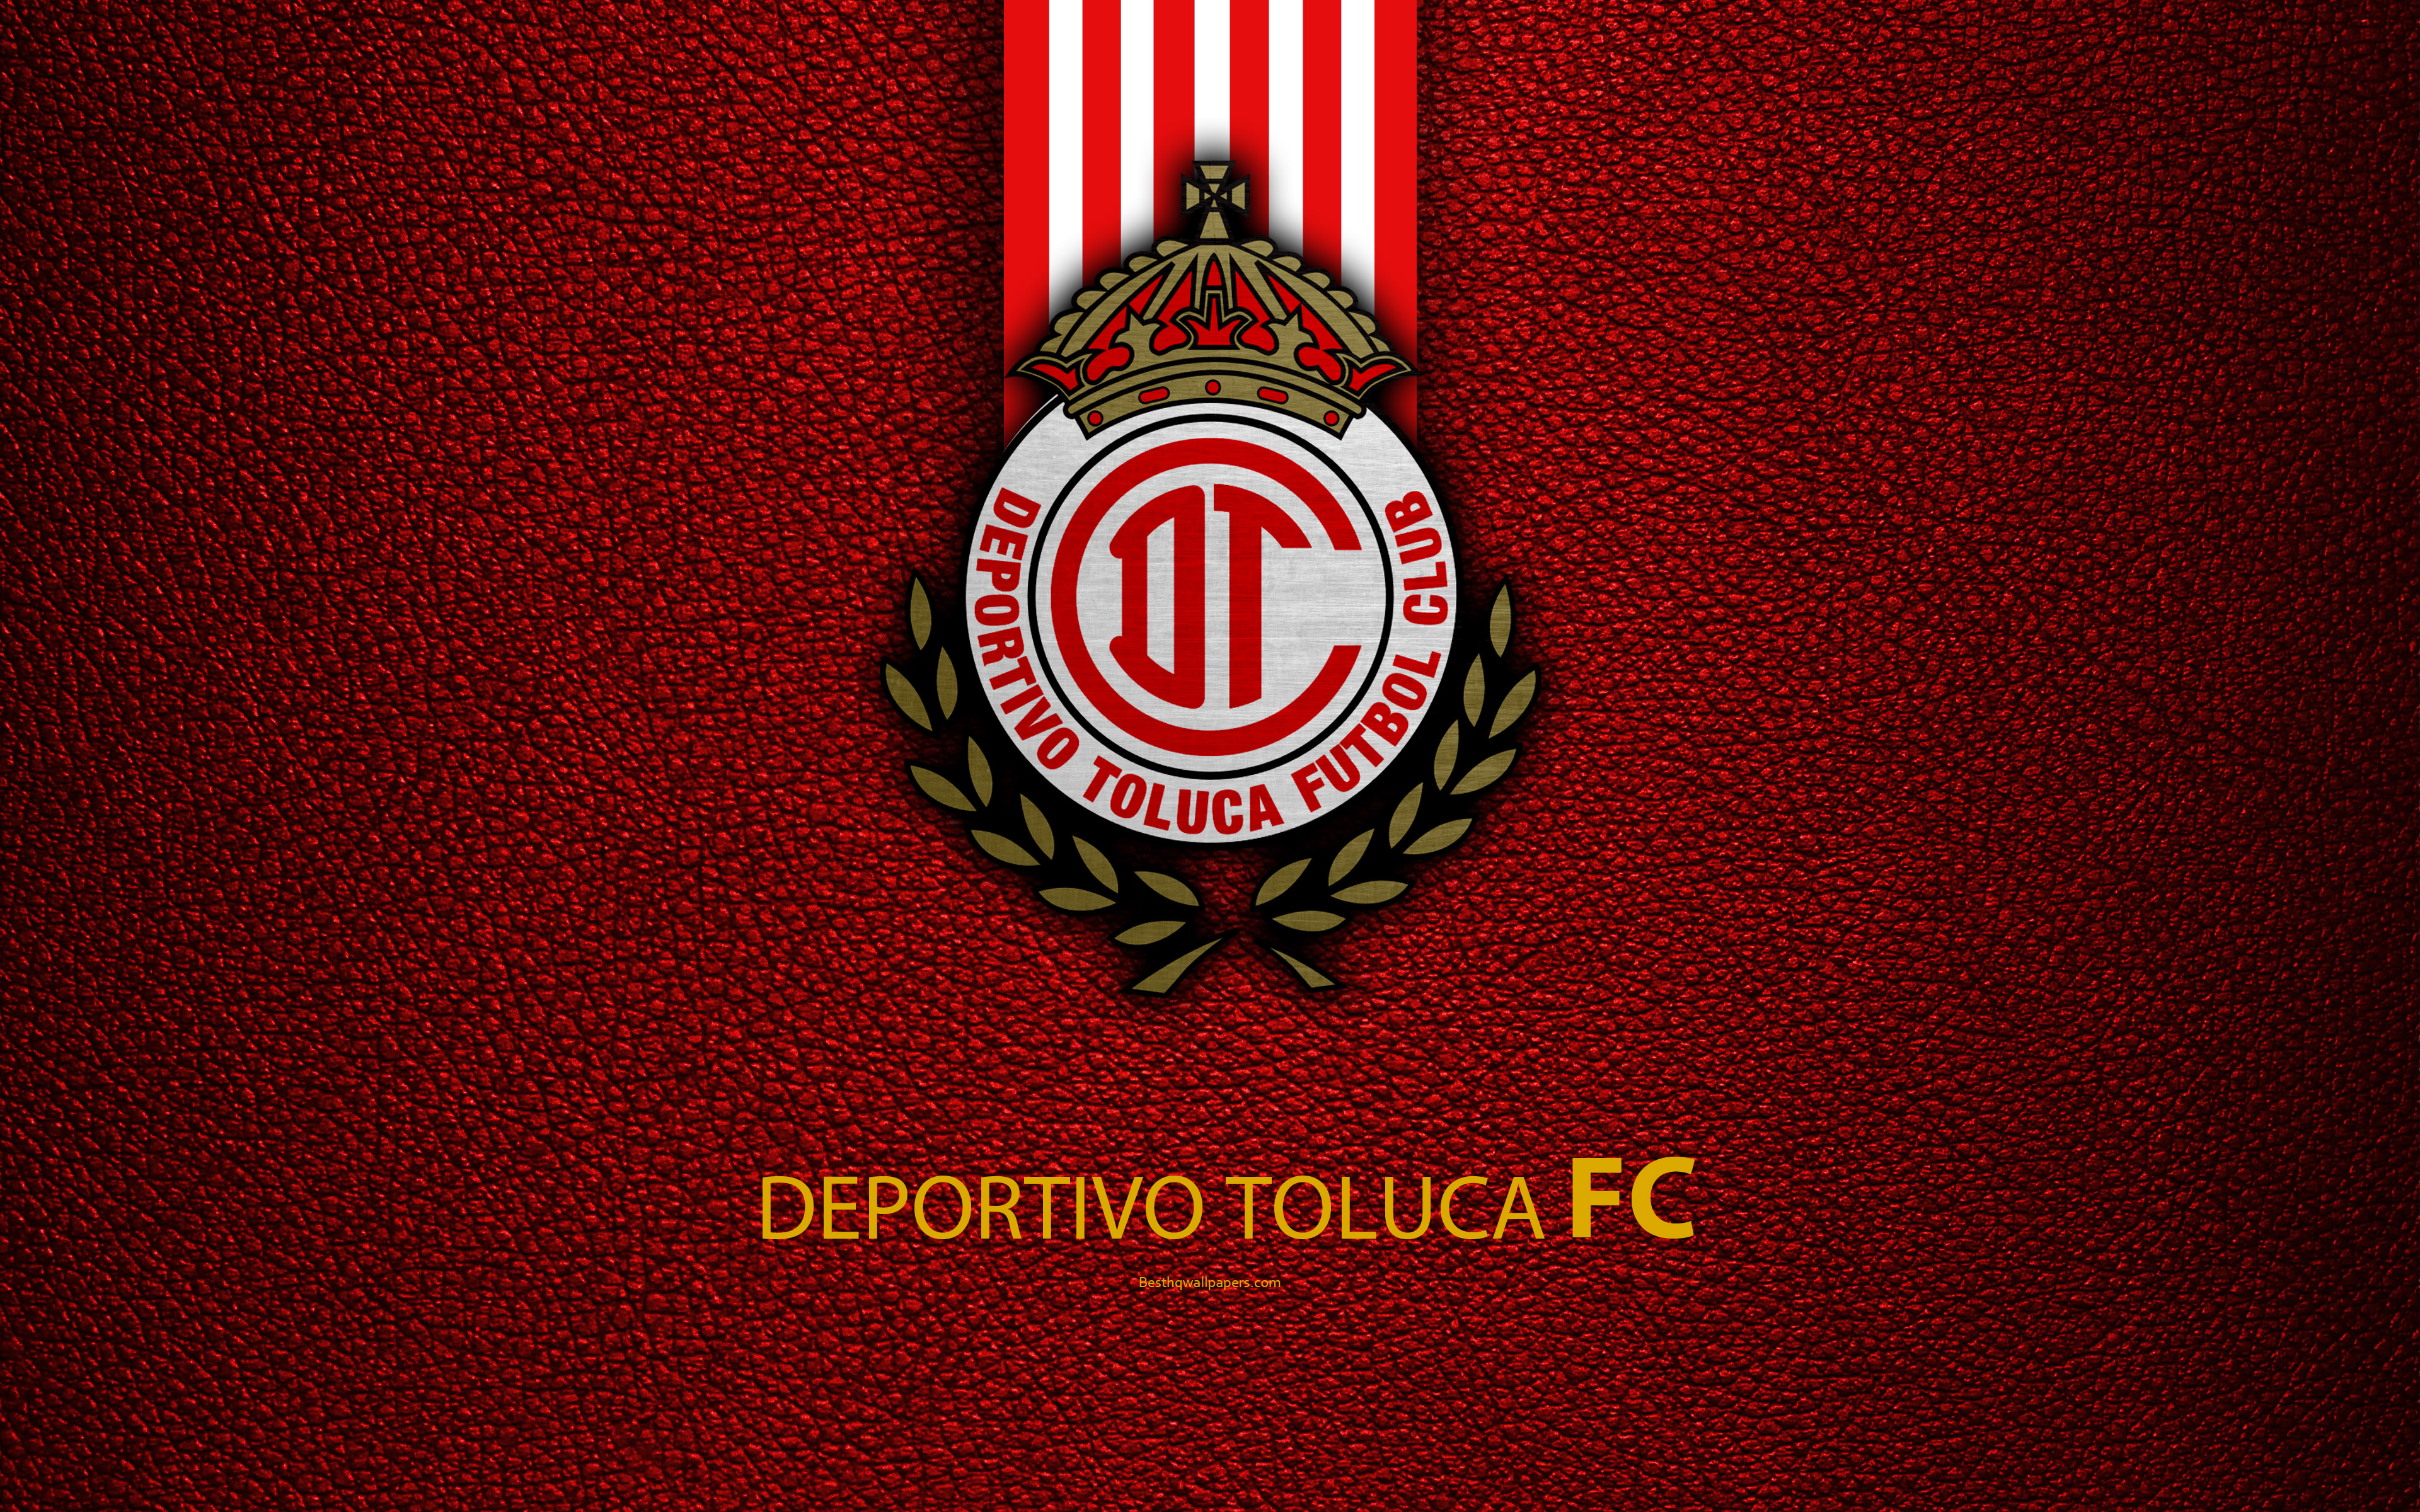 Download wallpaper Deportivo Toluca FC, 4k, leather texture, logo, Mexican football club, red white lines, Liga MX, Primera Division, Toluca de Lerdo, Mexico, football for desktop with resolution 3840x2400. High Quality HD